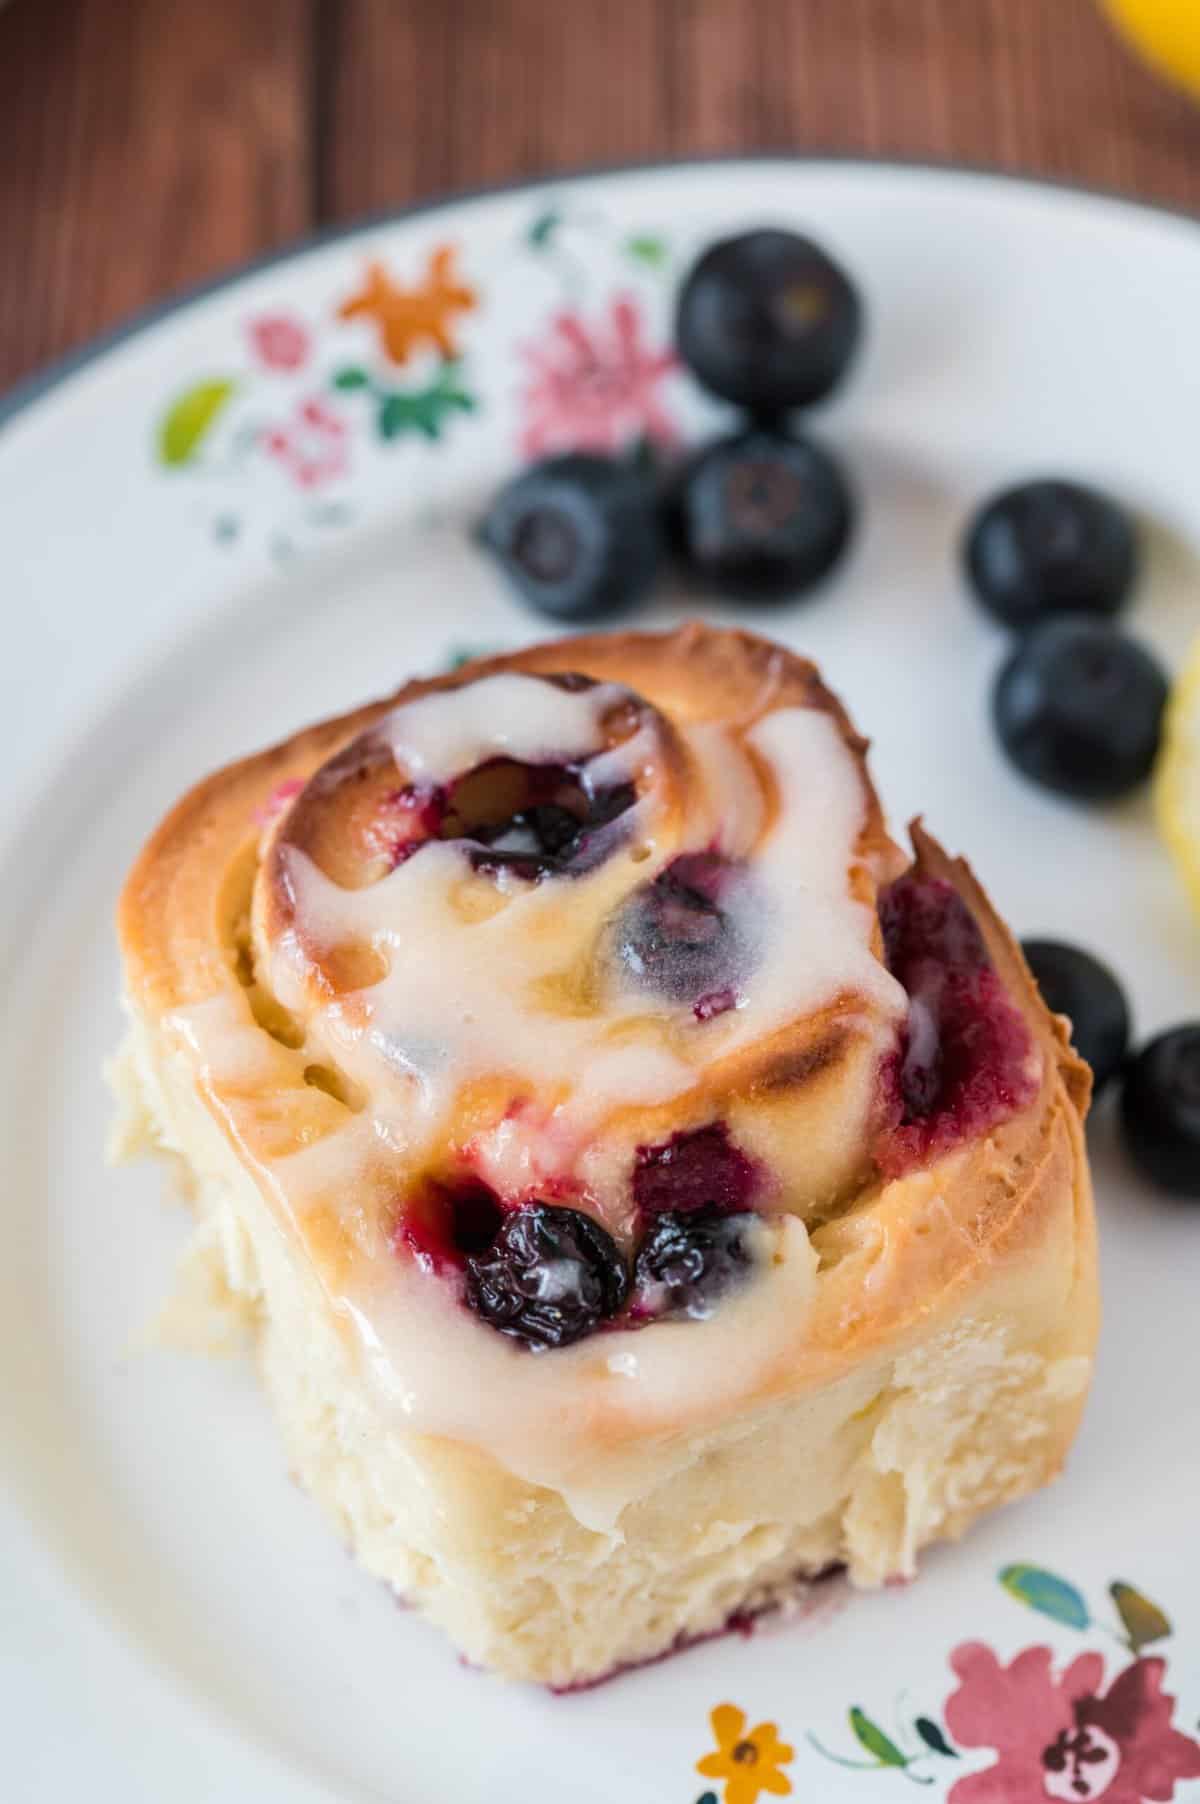 A glazed lemon blueberry roll is on a white plate with little decorative flowers.